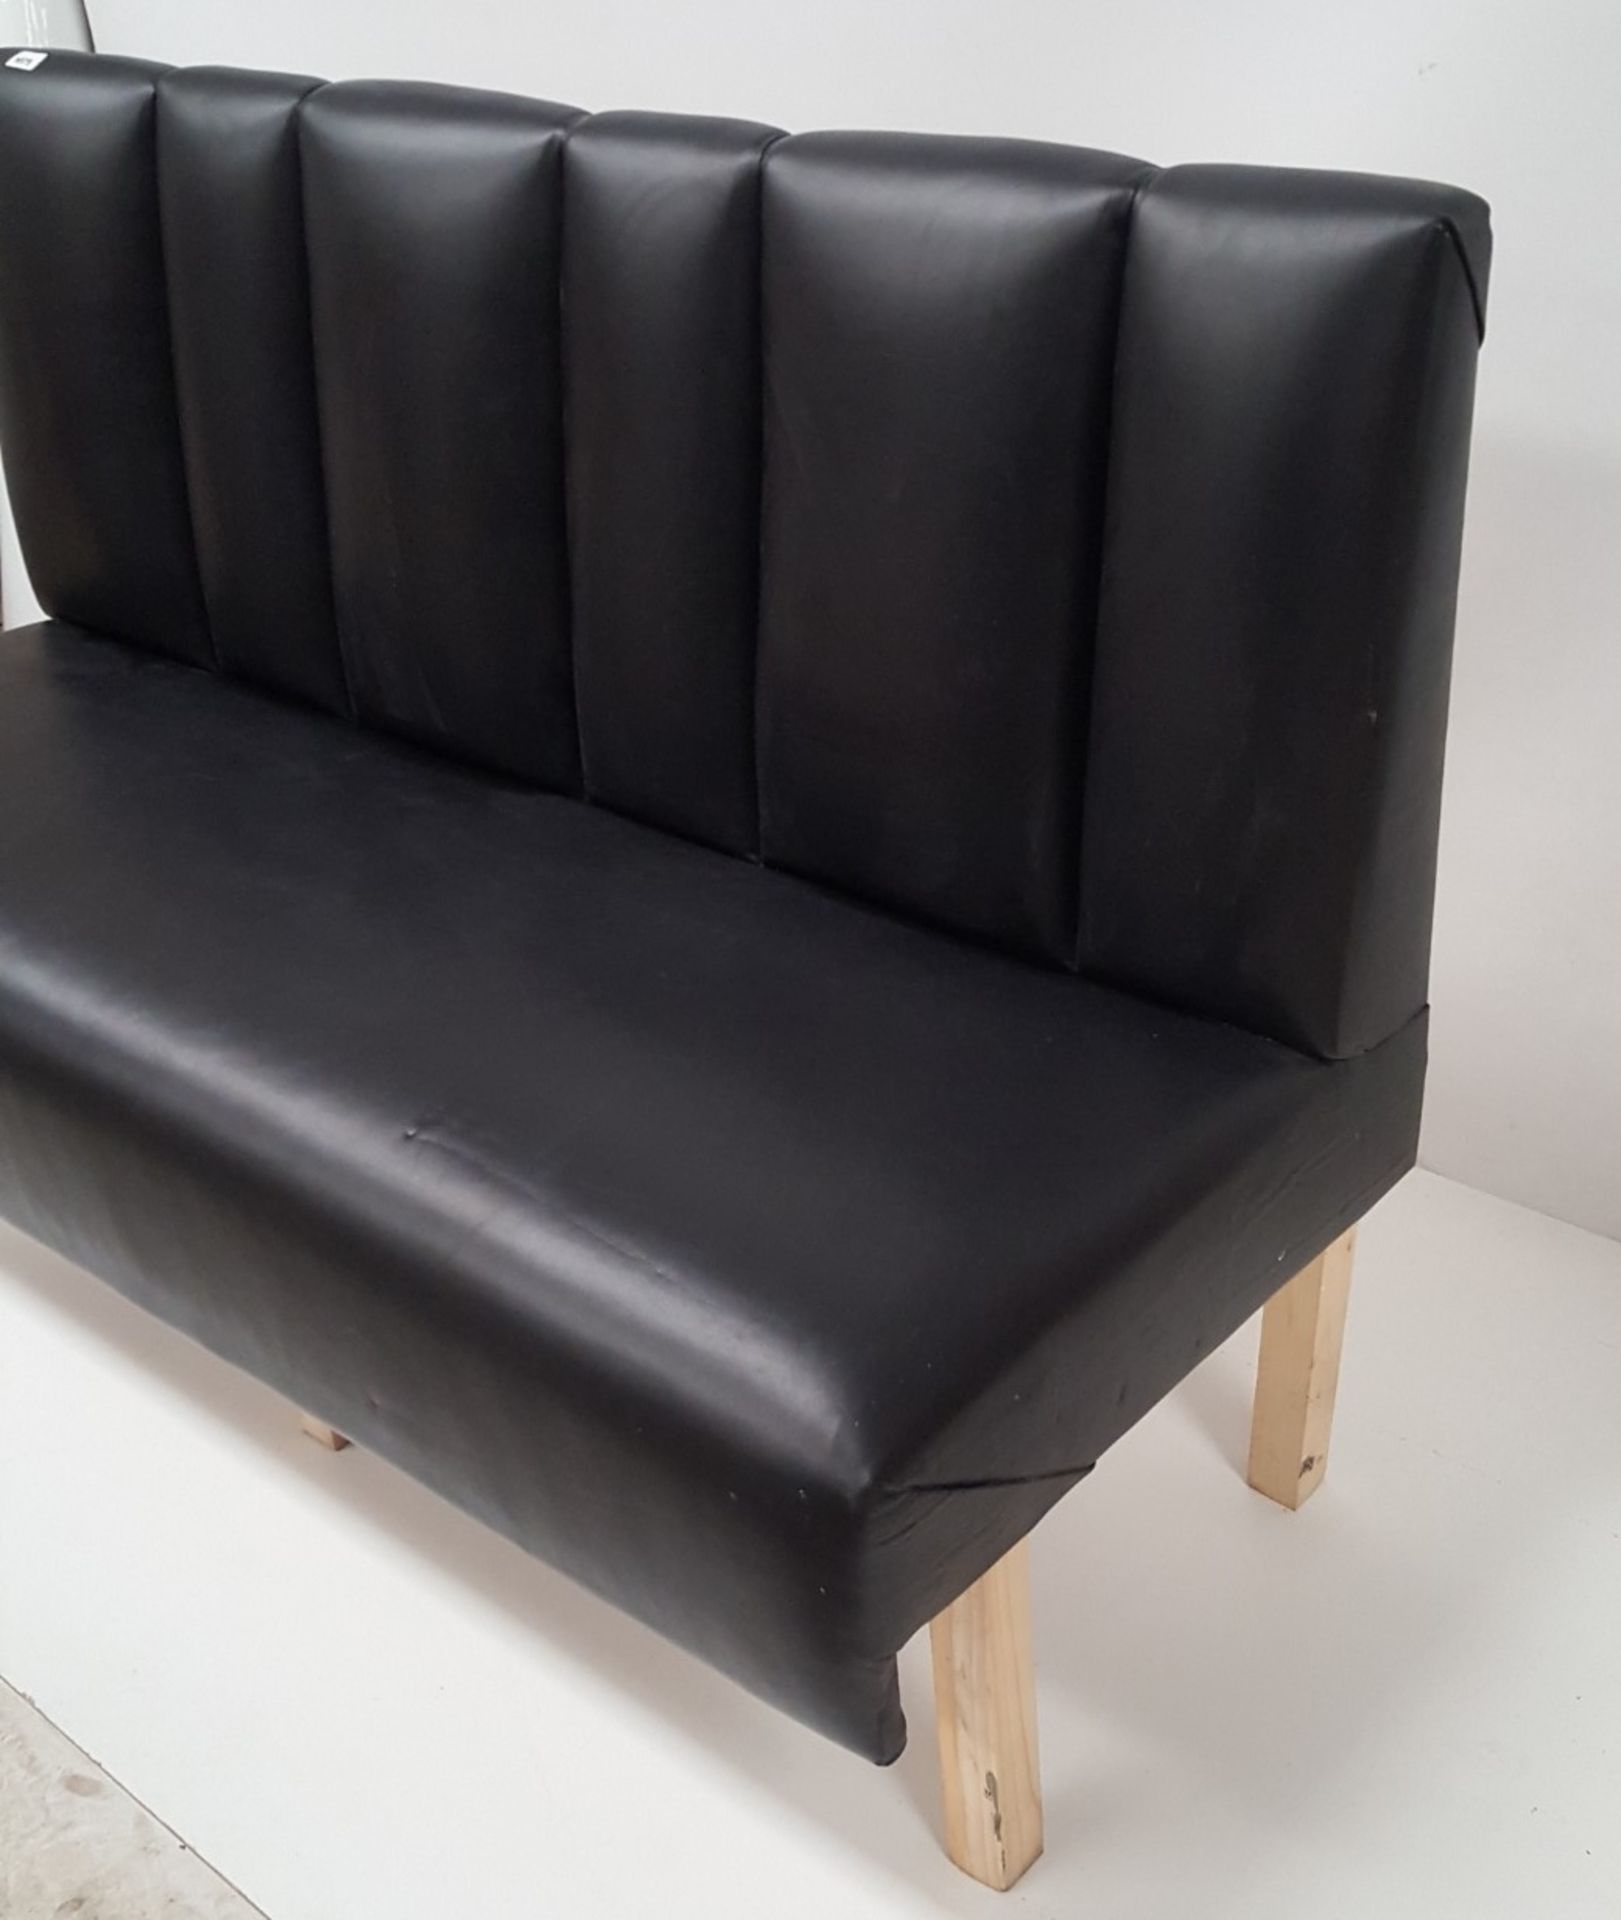 3 Pieces Of Black Upholstered Faux Leather Seating Booths - CL431 - Location: Altrincham WA14 - Image 10 of 19